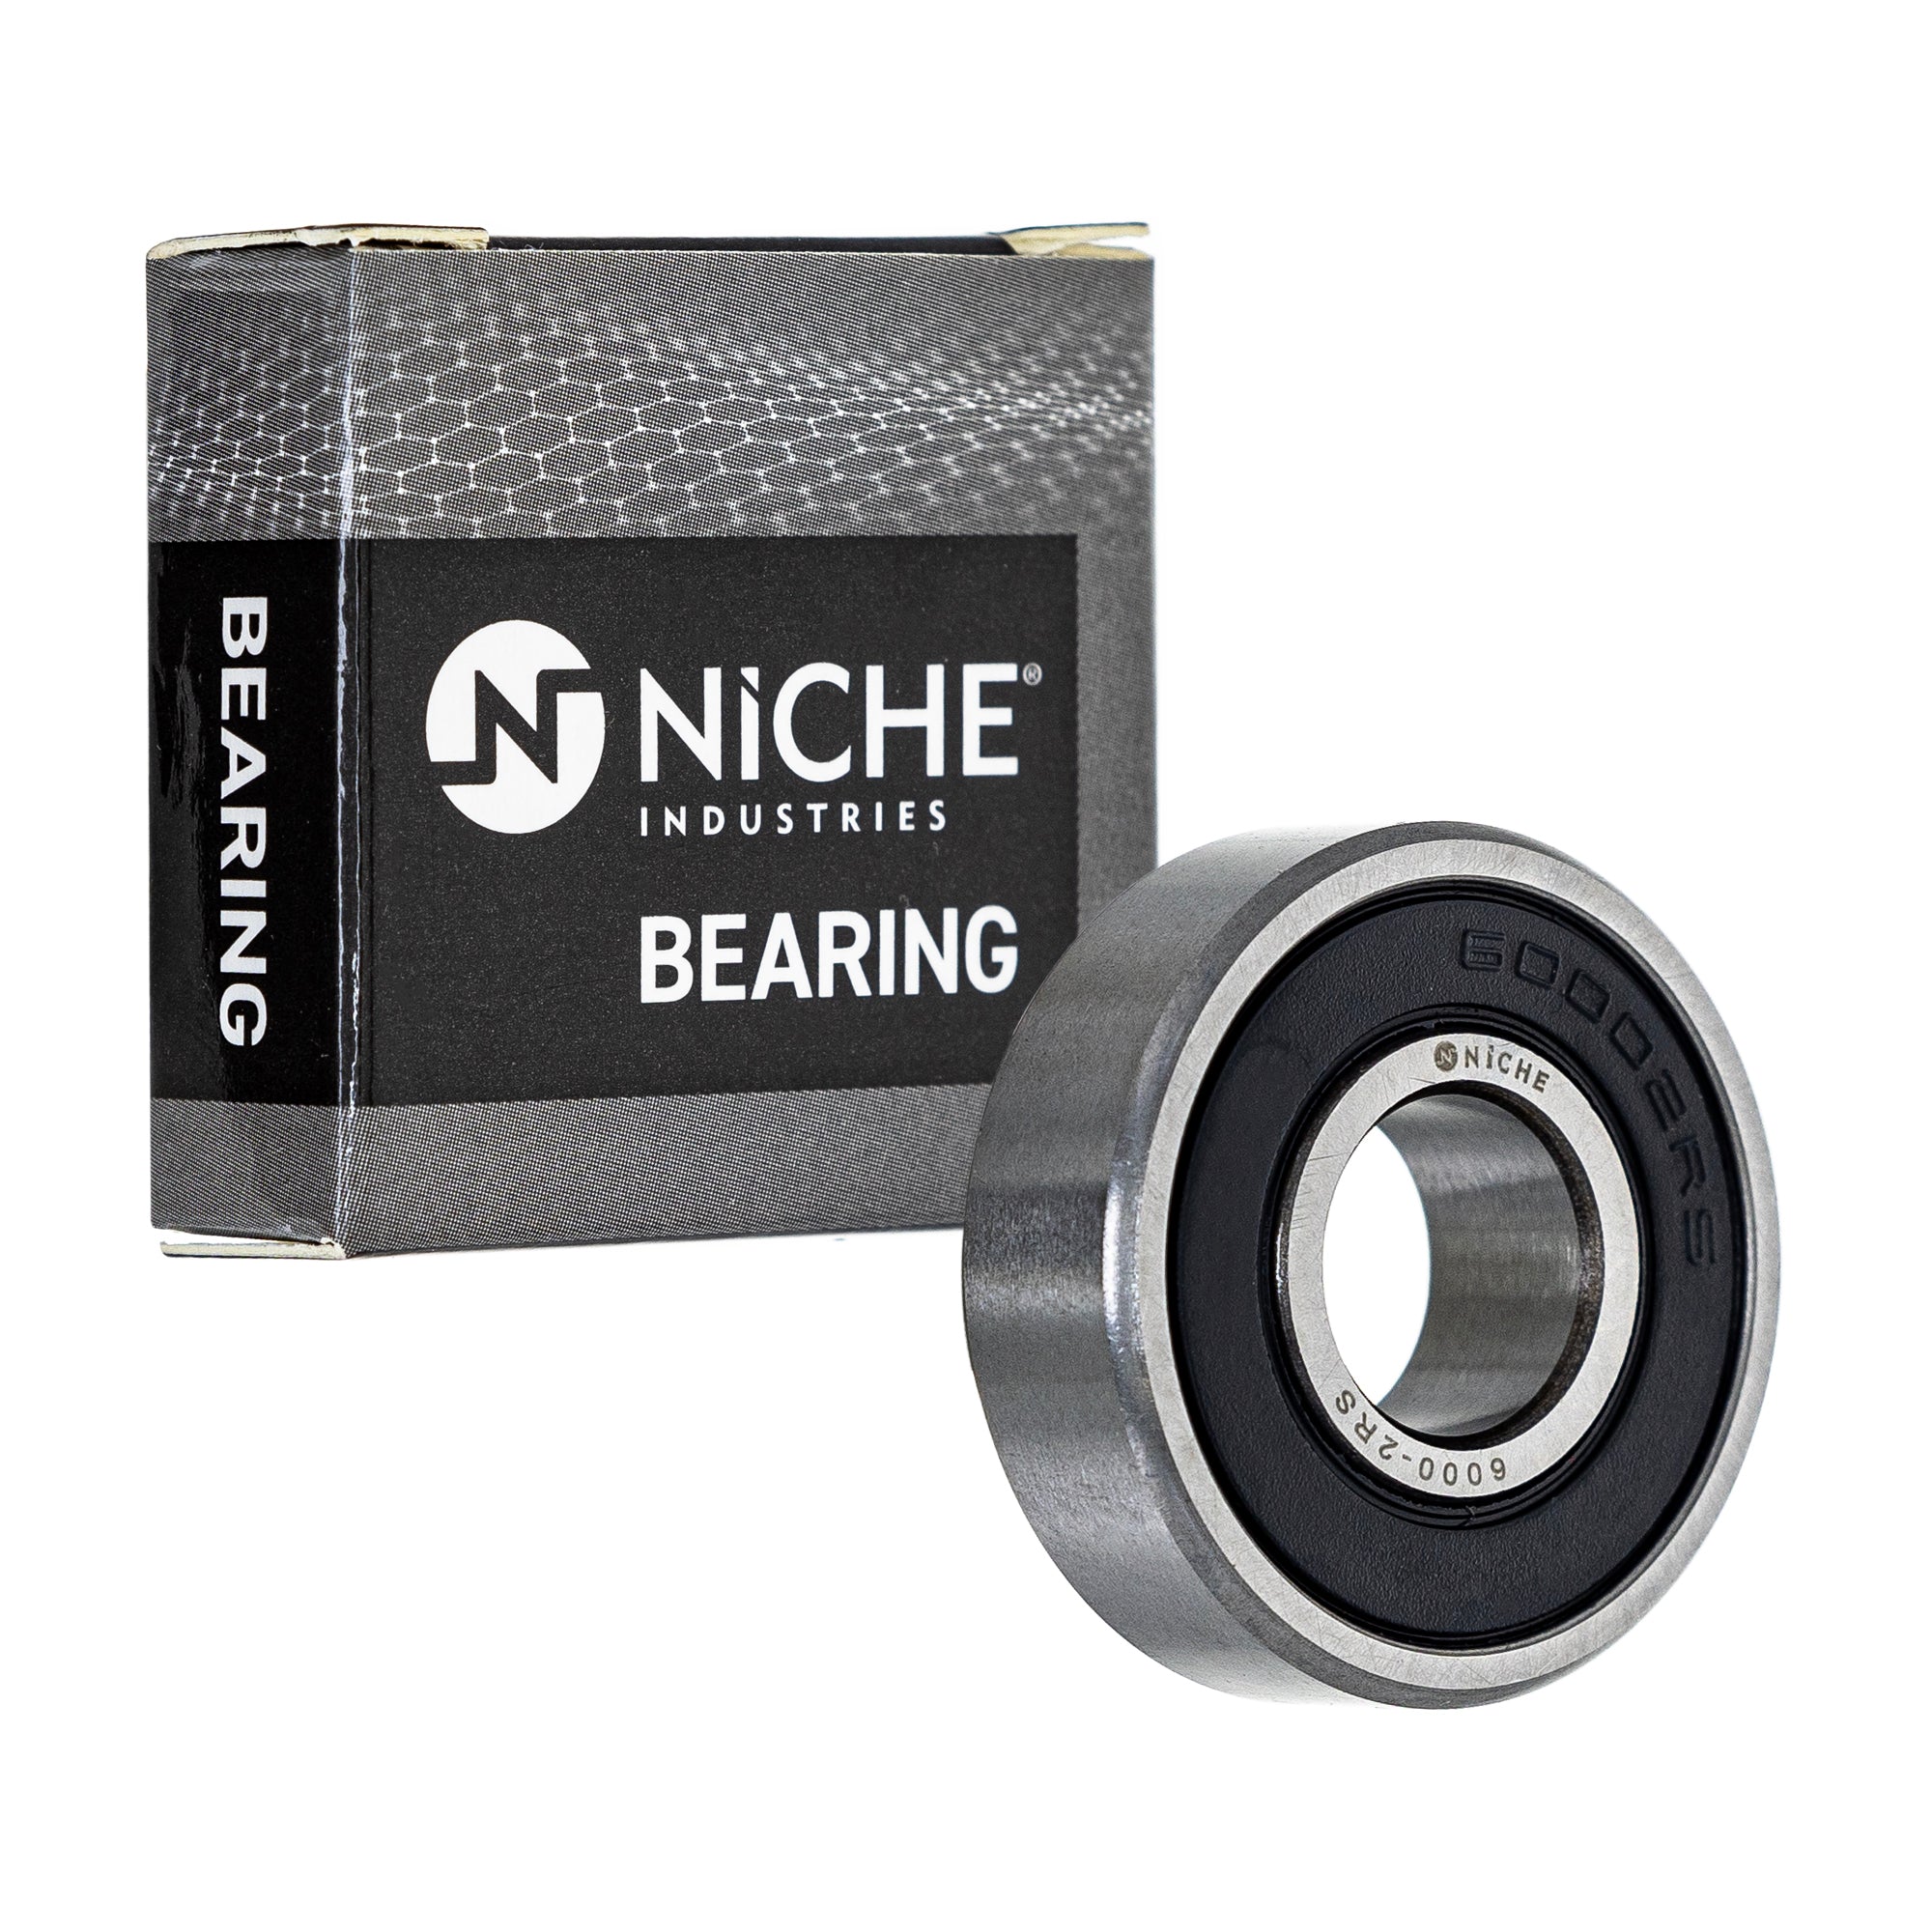 NICHE 519-CBB2256R Bearing 10-Pack for zOTHER KDX50 JR50